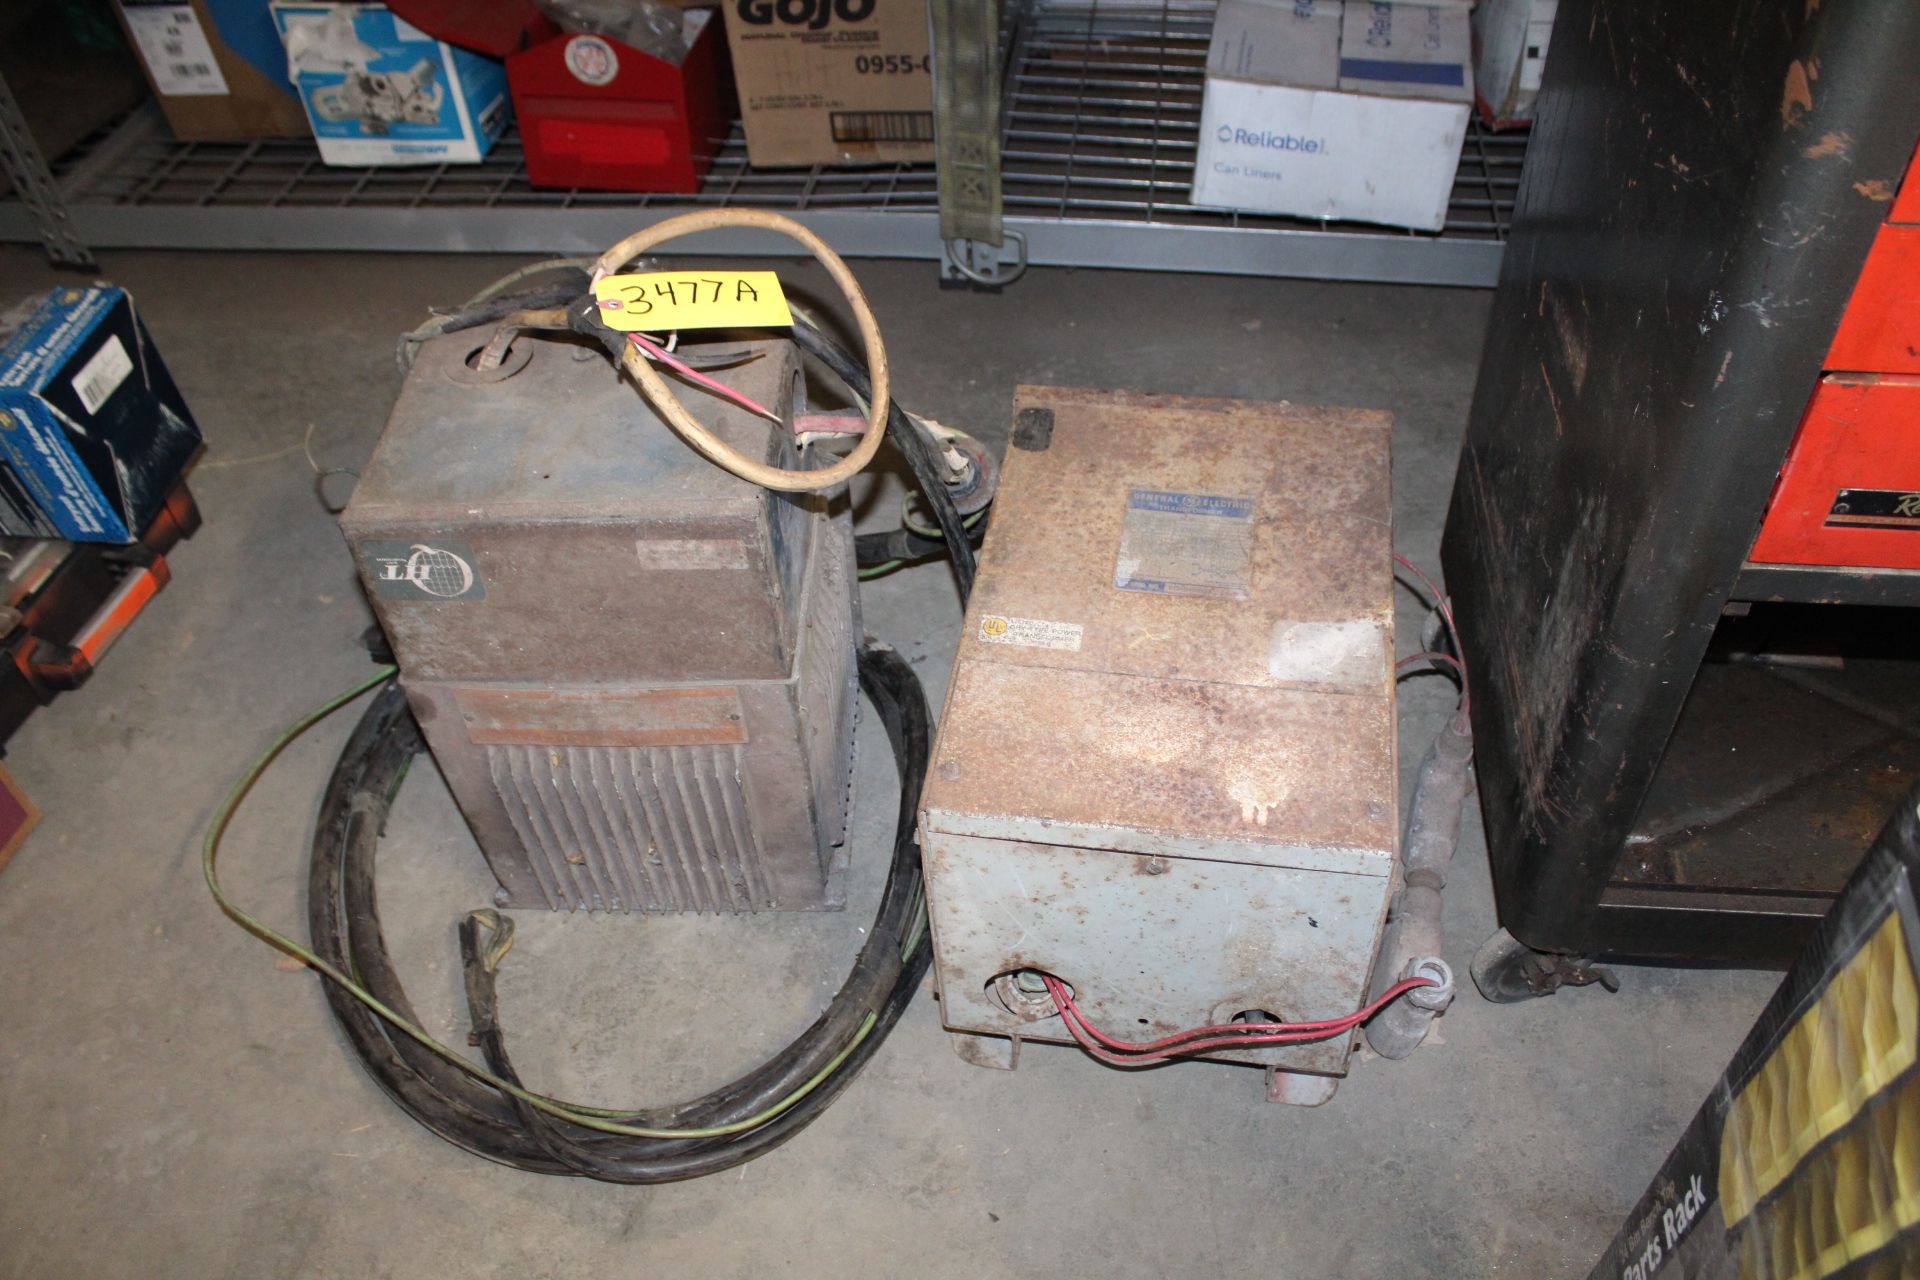 (2) GENERAL ELECTRIC TRANSFORMERS, 9T21B1006G2 AND 9121B1006